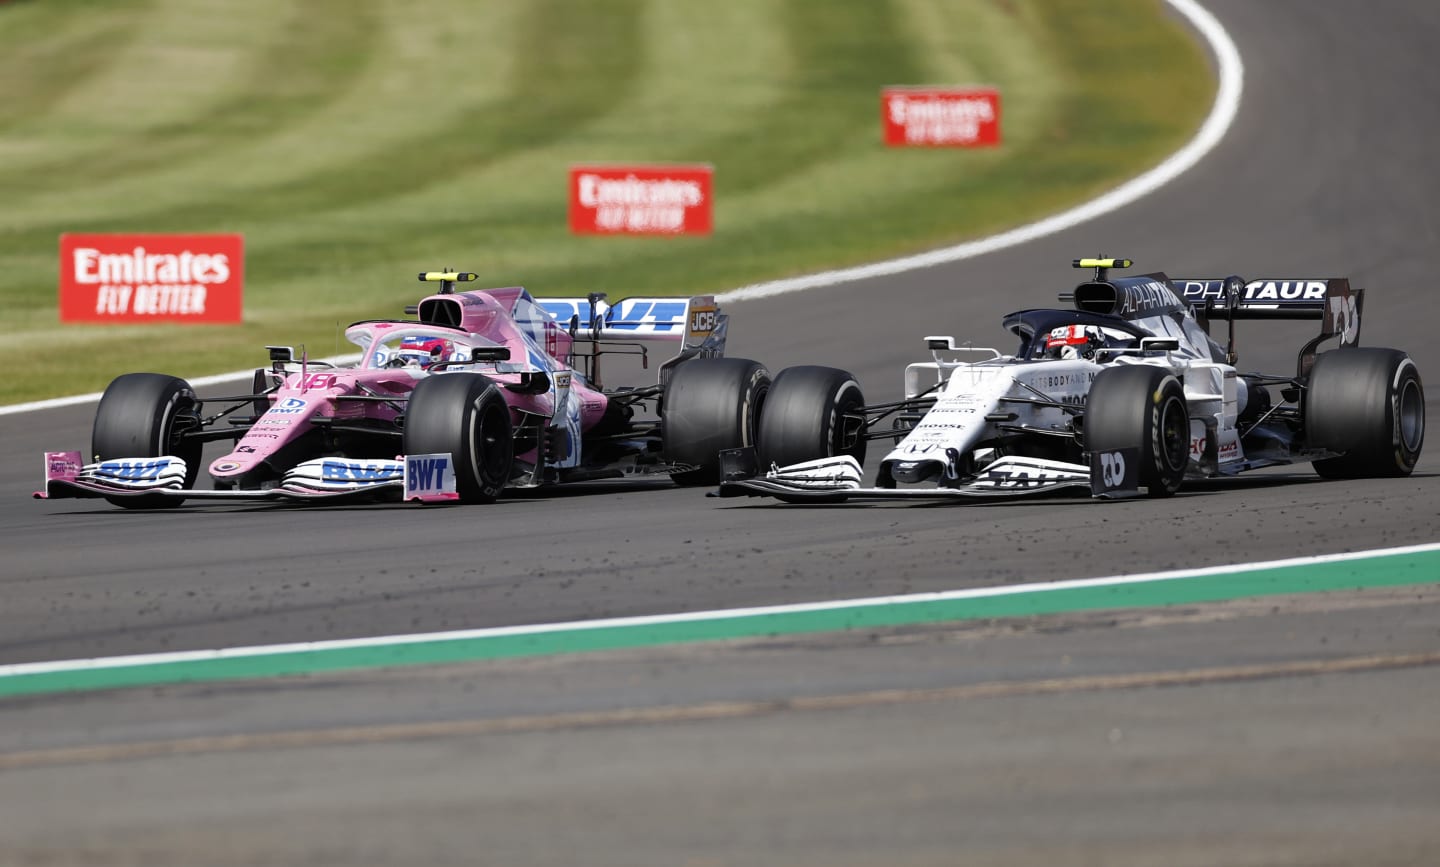 NORTHAMPTON, ENGLAND - AUGUST 02: Lance Stroll of Canada driving the (18) Racing Point RP20 Mercedes battles for position with Pierre Gasly of France driving the (10) Scuderia AlphaTauri AT01 Honda during the F1 Grand Prix of Great Britain at Silverstone on August 02, 2020 in Northampton, England. (Photo by Andrew Boyers/Pool via Getty Images)